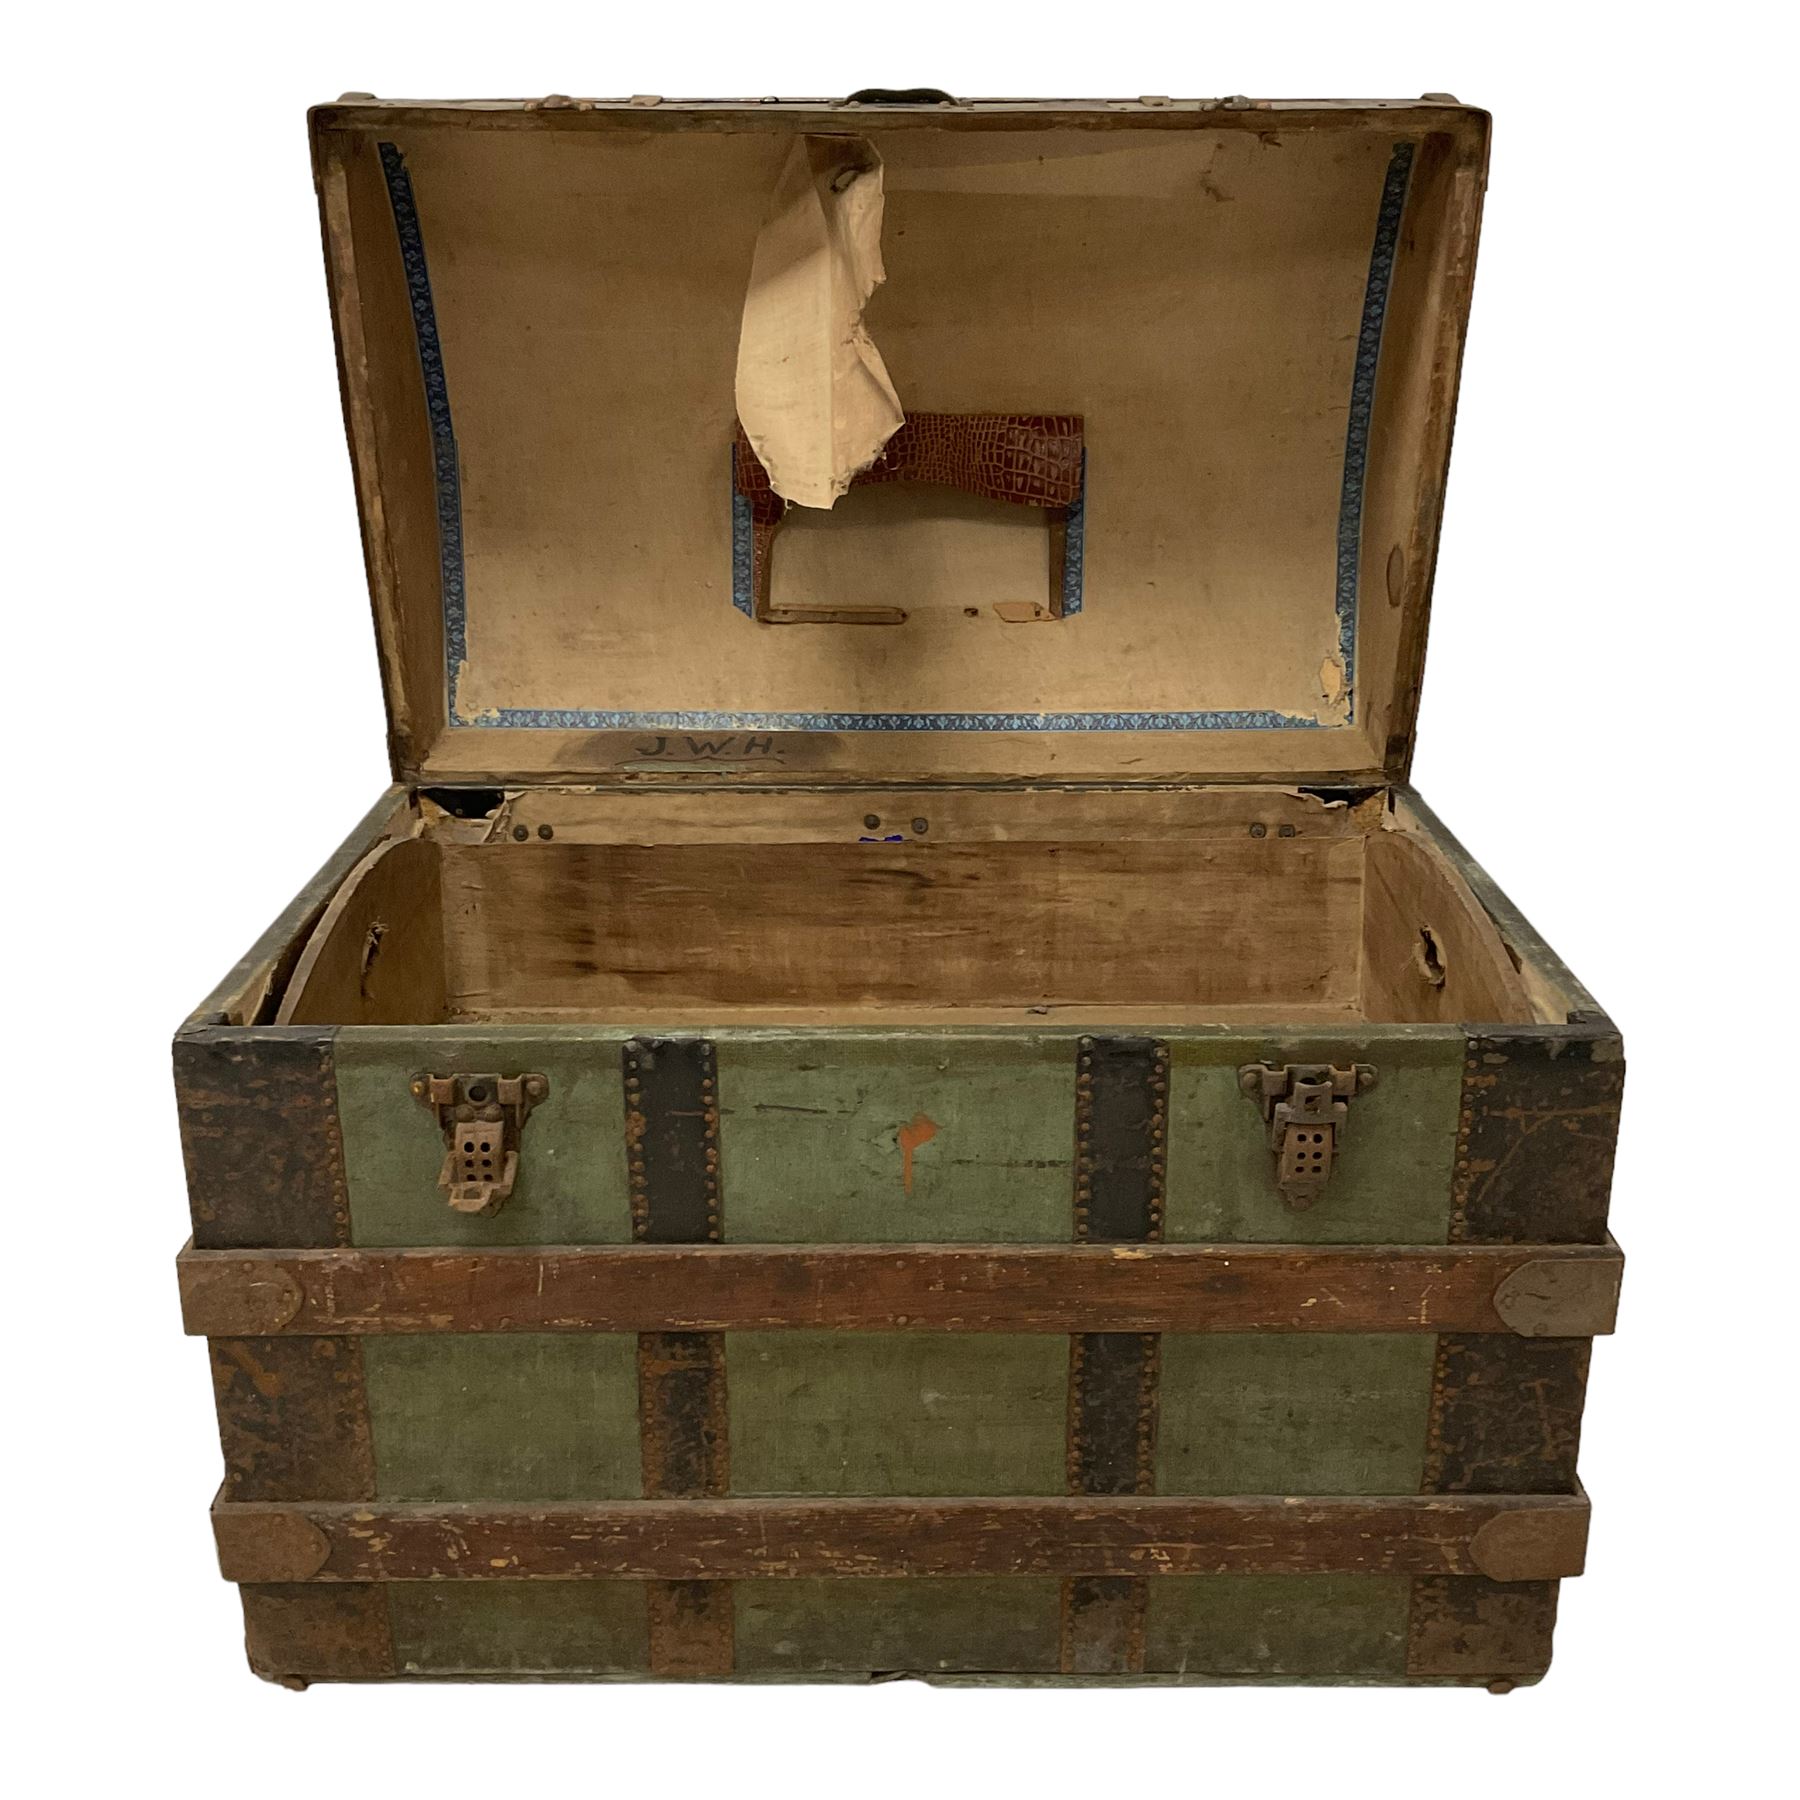 Late 19th century wood and metal bound dome-top trunk - Image 2 of 4